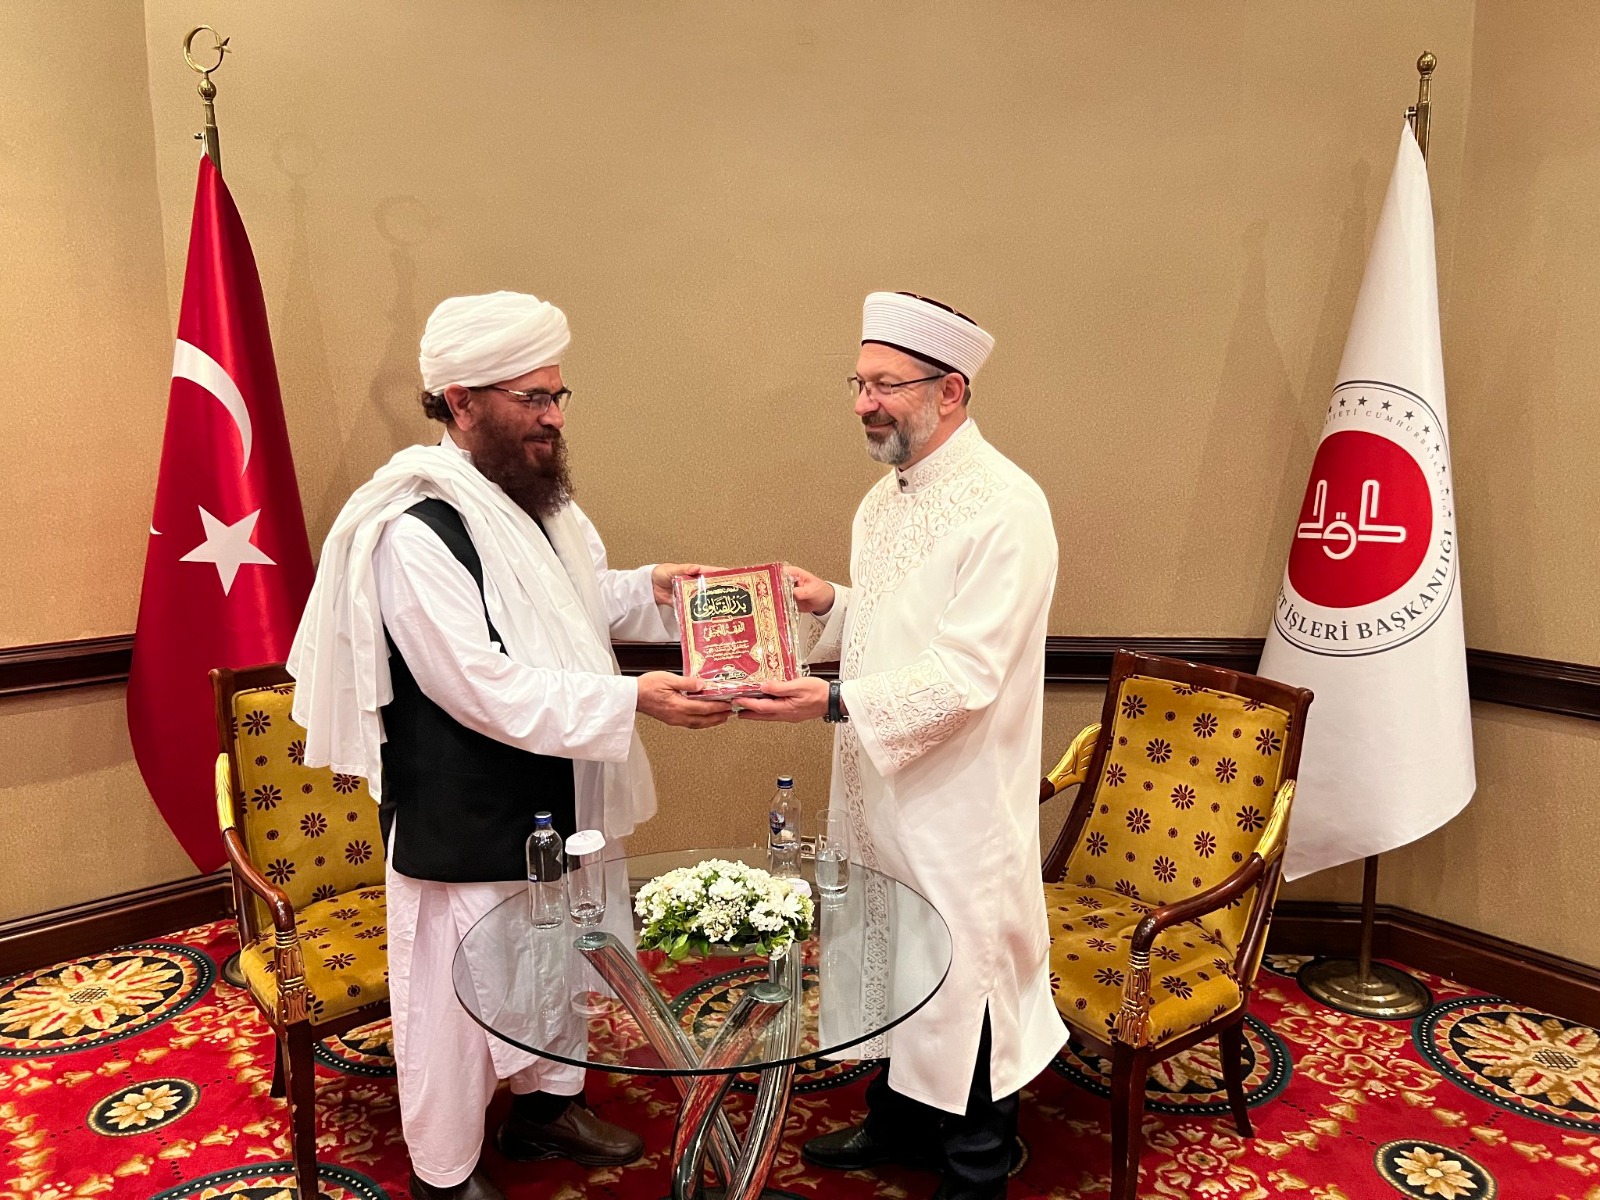 Meeting of the Minister of MOHIA with the Head of the Department of Religious Affairs in Turkey